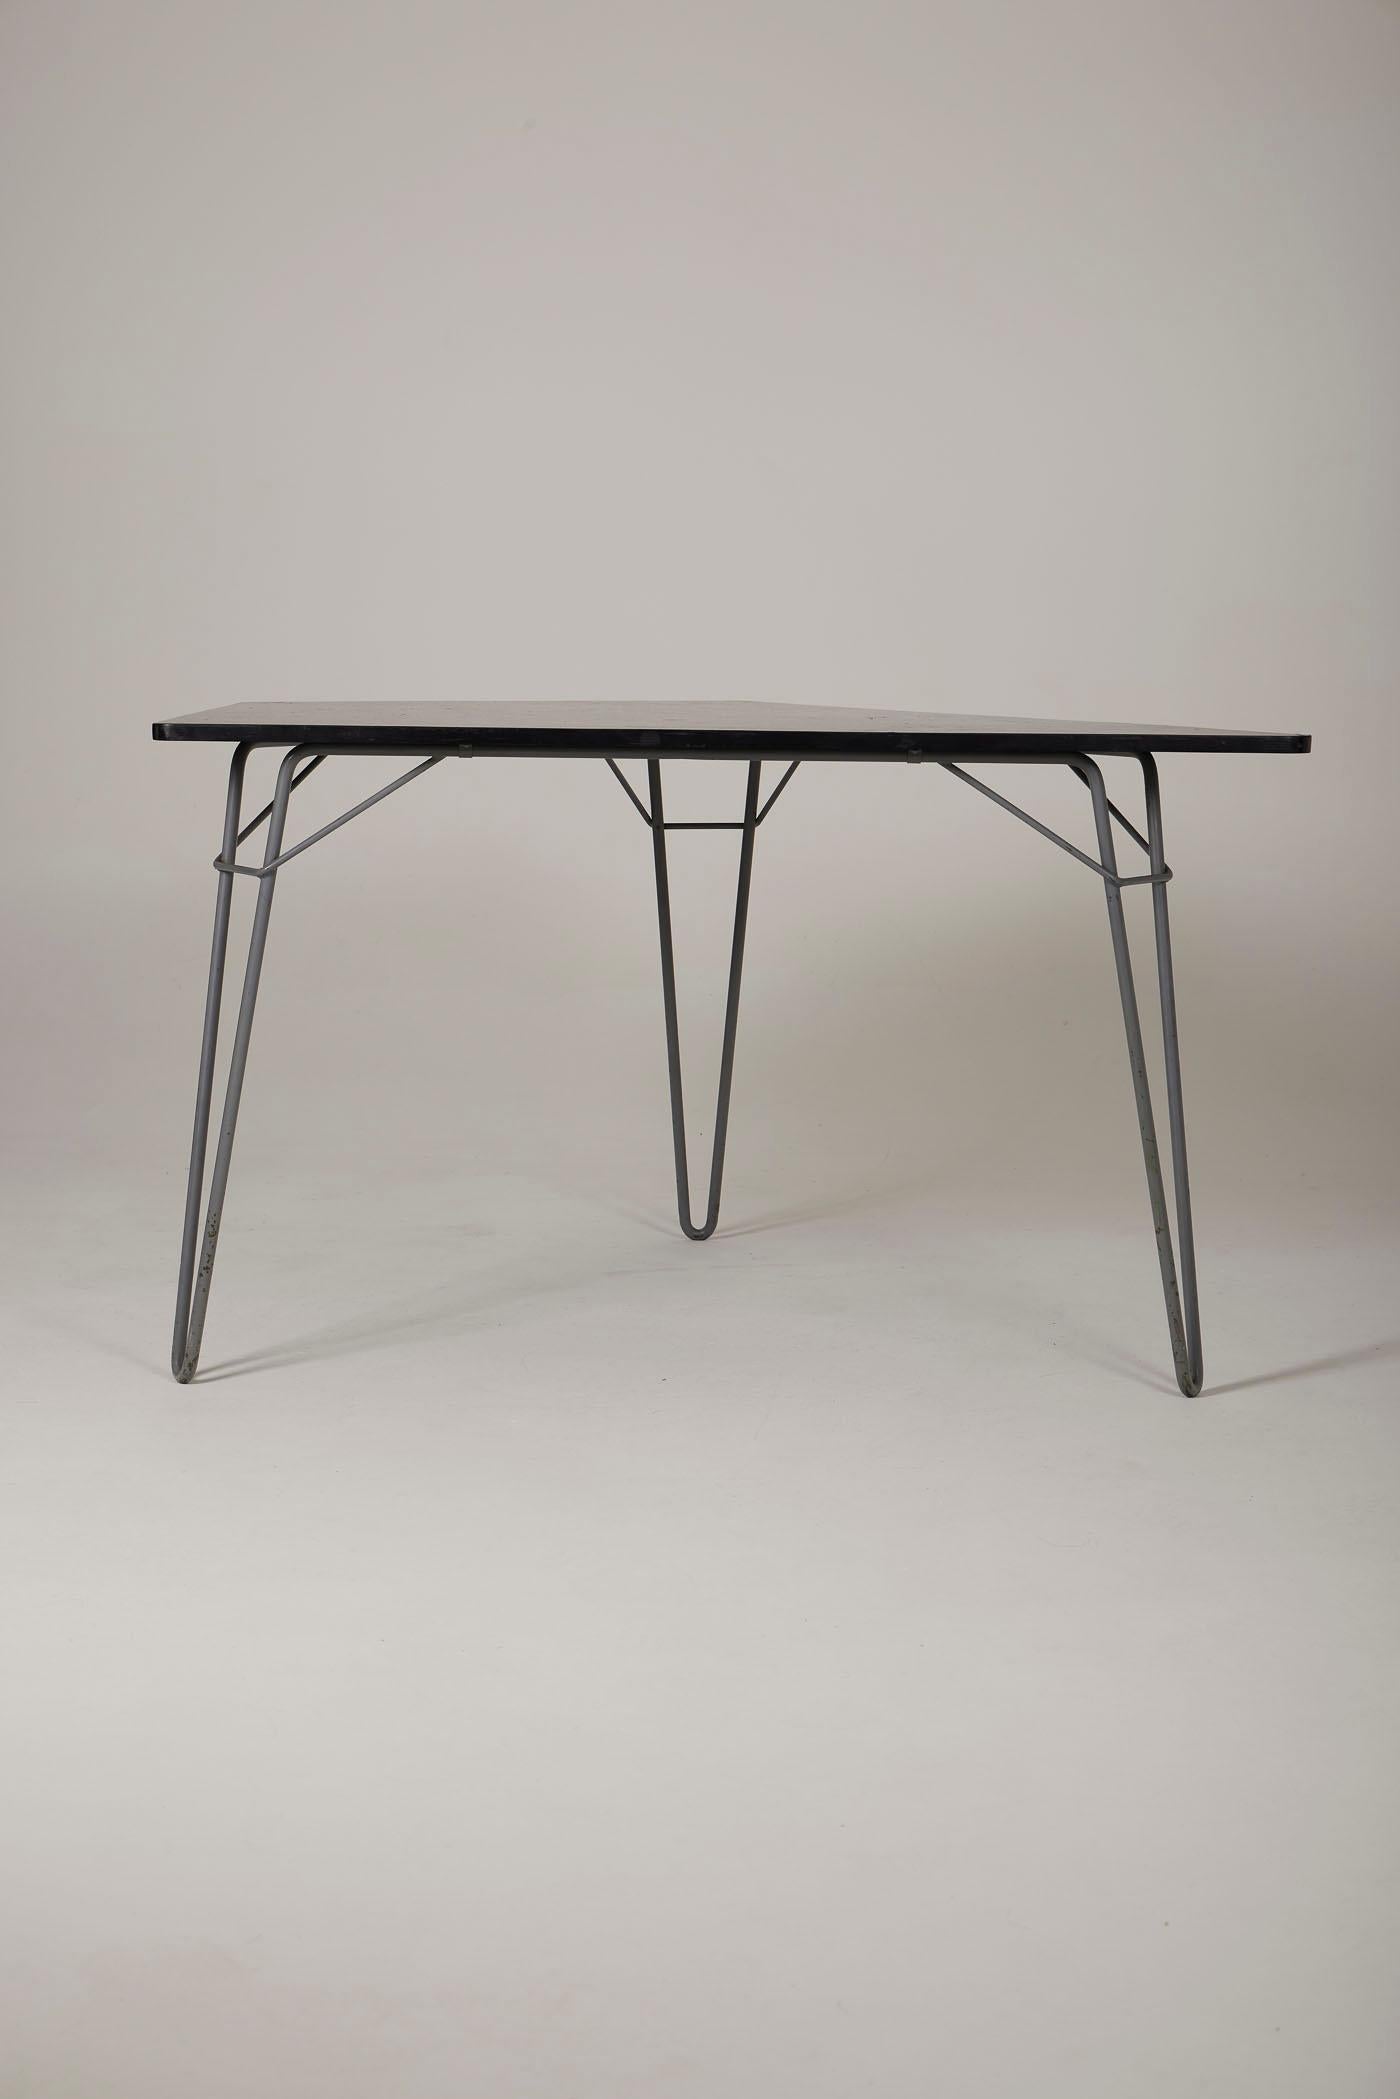 Dining table T1, Tangram model, designed by Willy Van der Meeren for Tubax, from the 1950s. This table features a black-stained wooden tabletop and a black lacquered metal base. In very good condition.
DV382